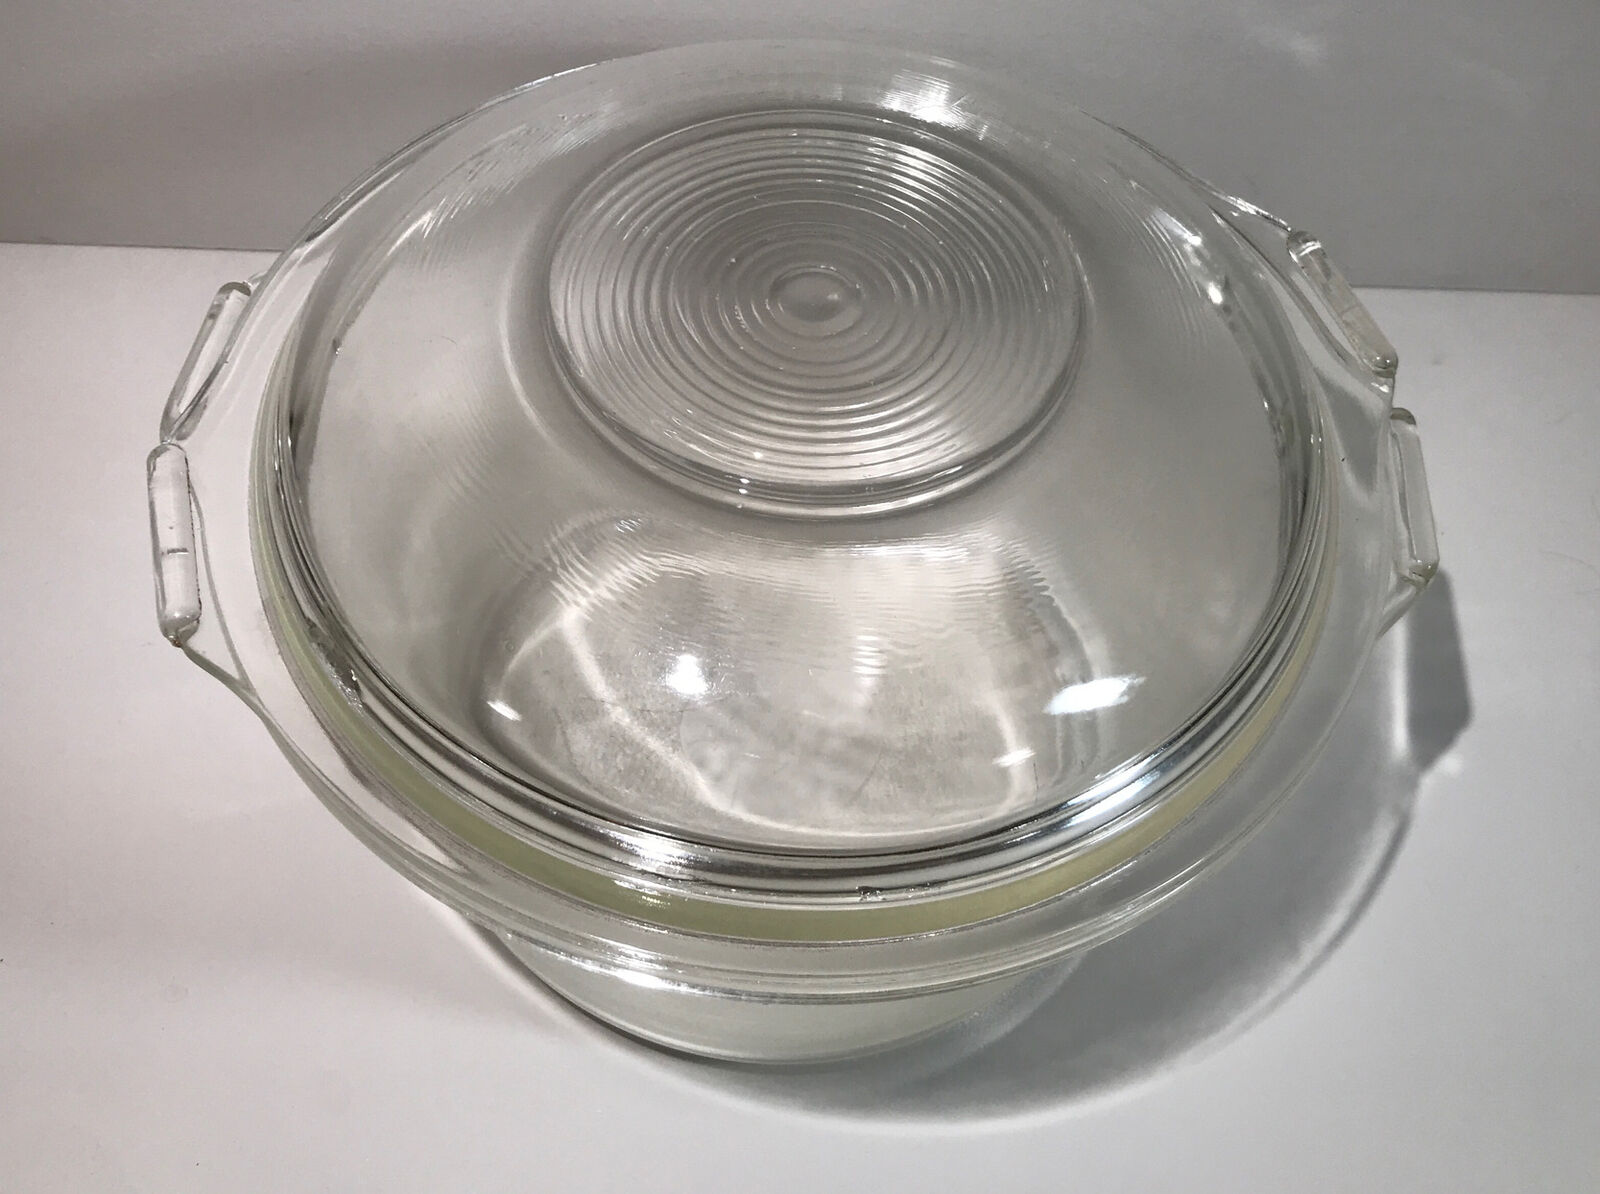 1940s Sears Flamex McKee Dutch Oven, Lid 6 Quart Incredibly Rare Kitchen Glass